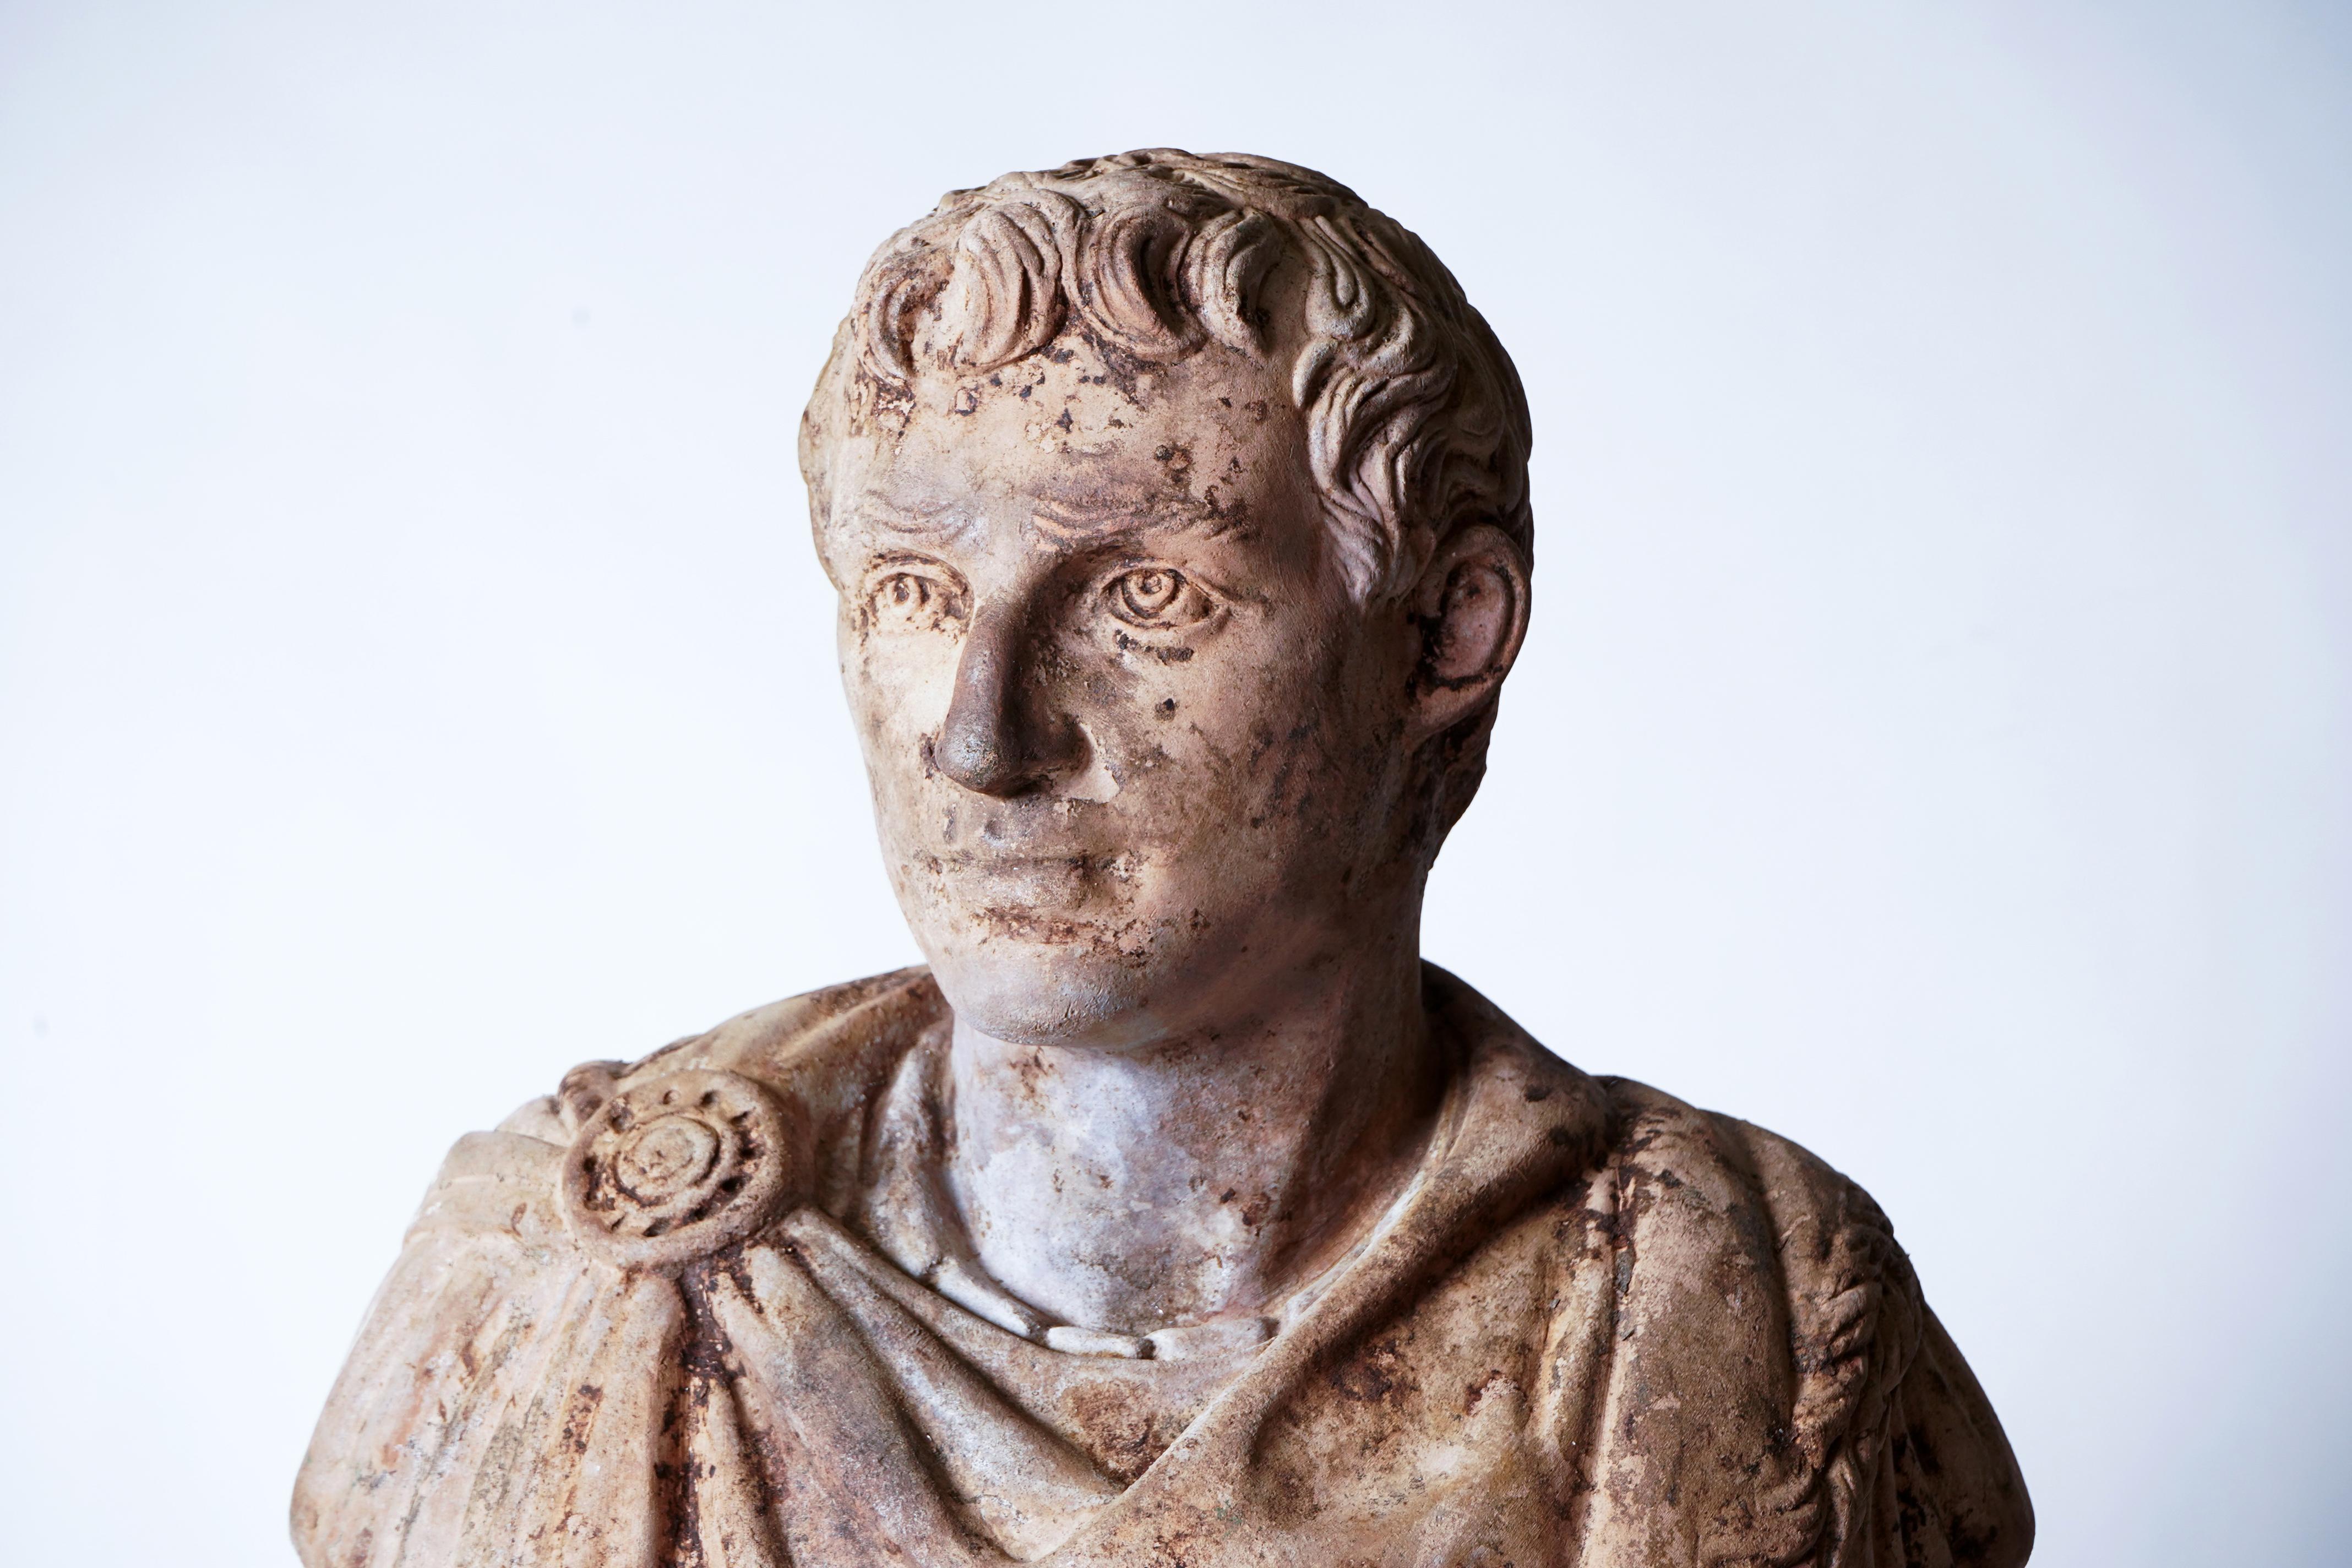 This 20th century bust of a Roman emperor is made from terra cotta and has the discoloration and patina that comes from outdoor use.
 